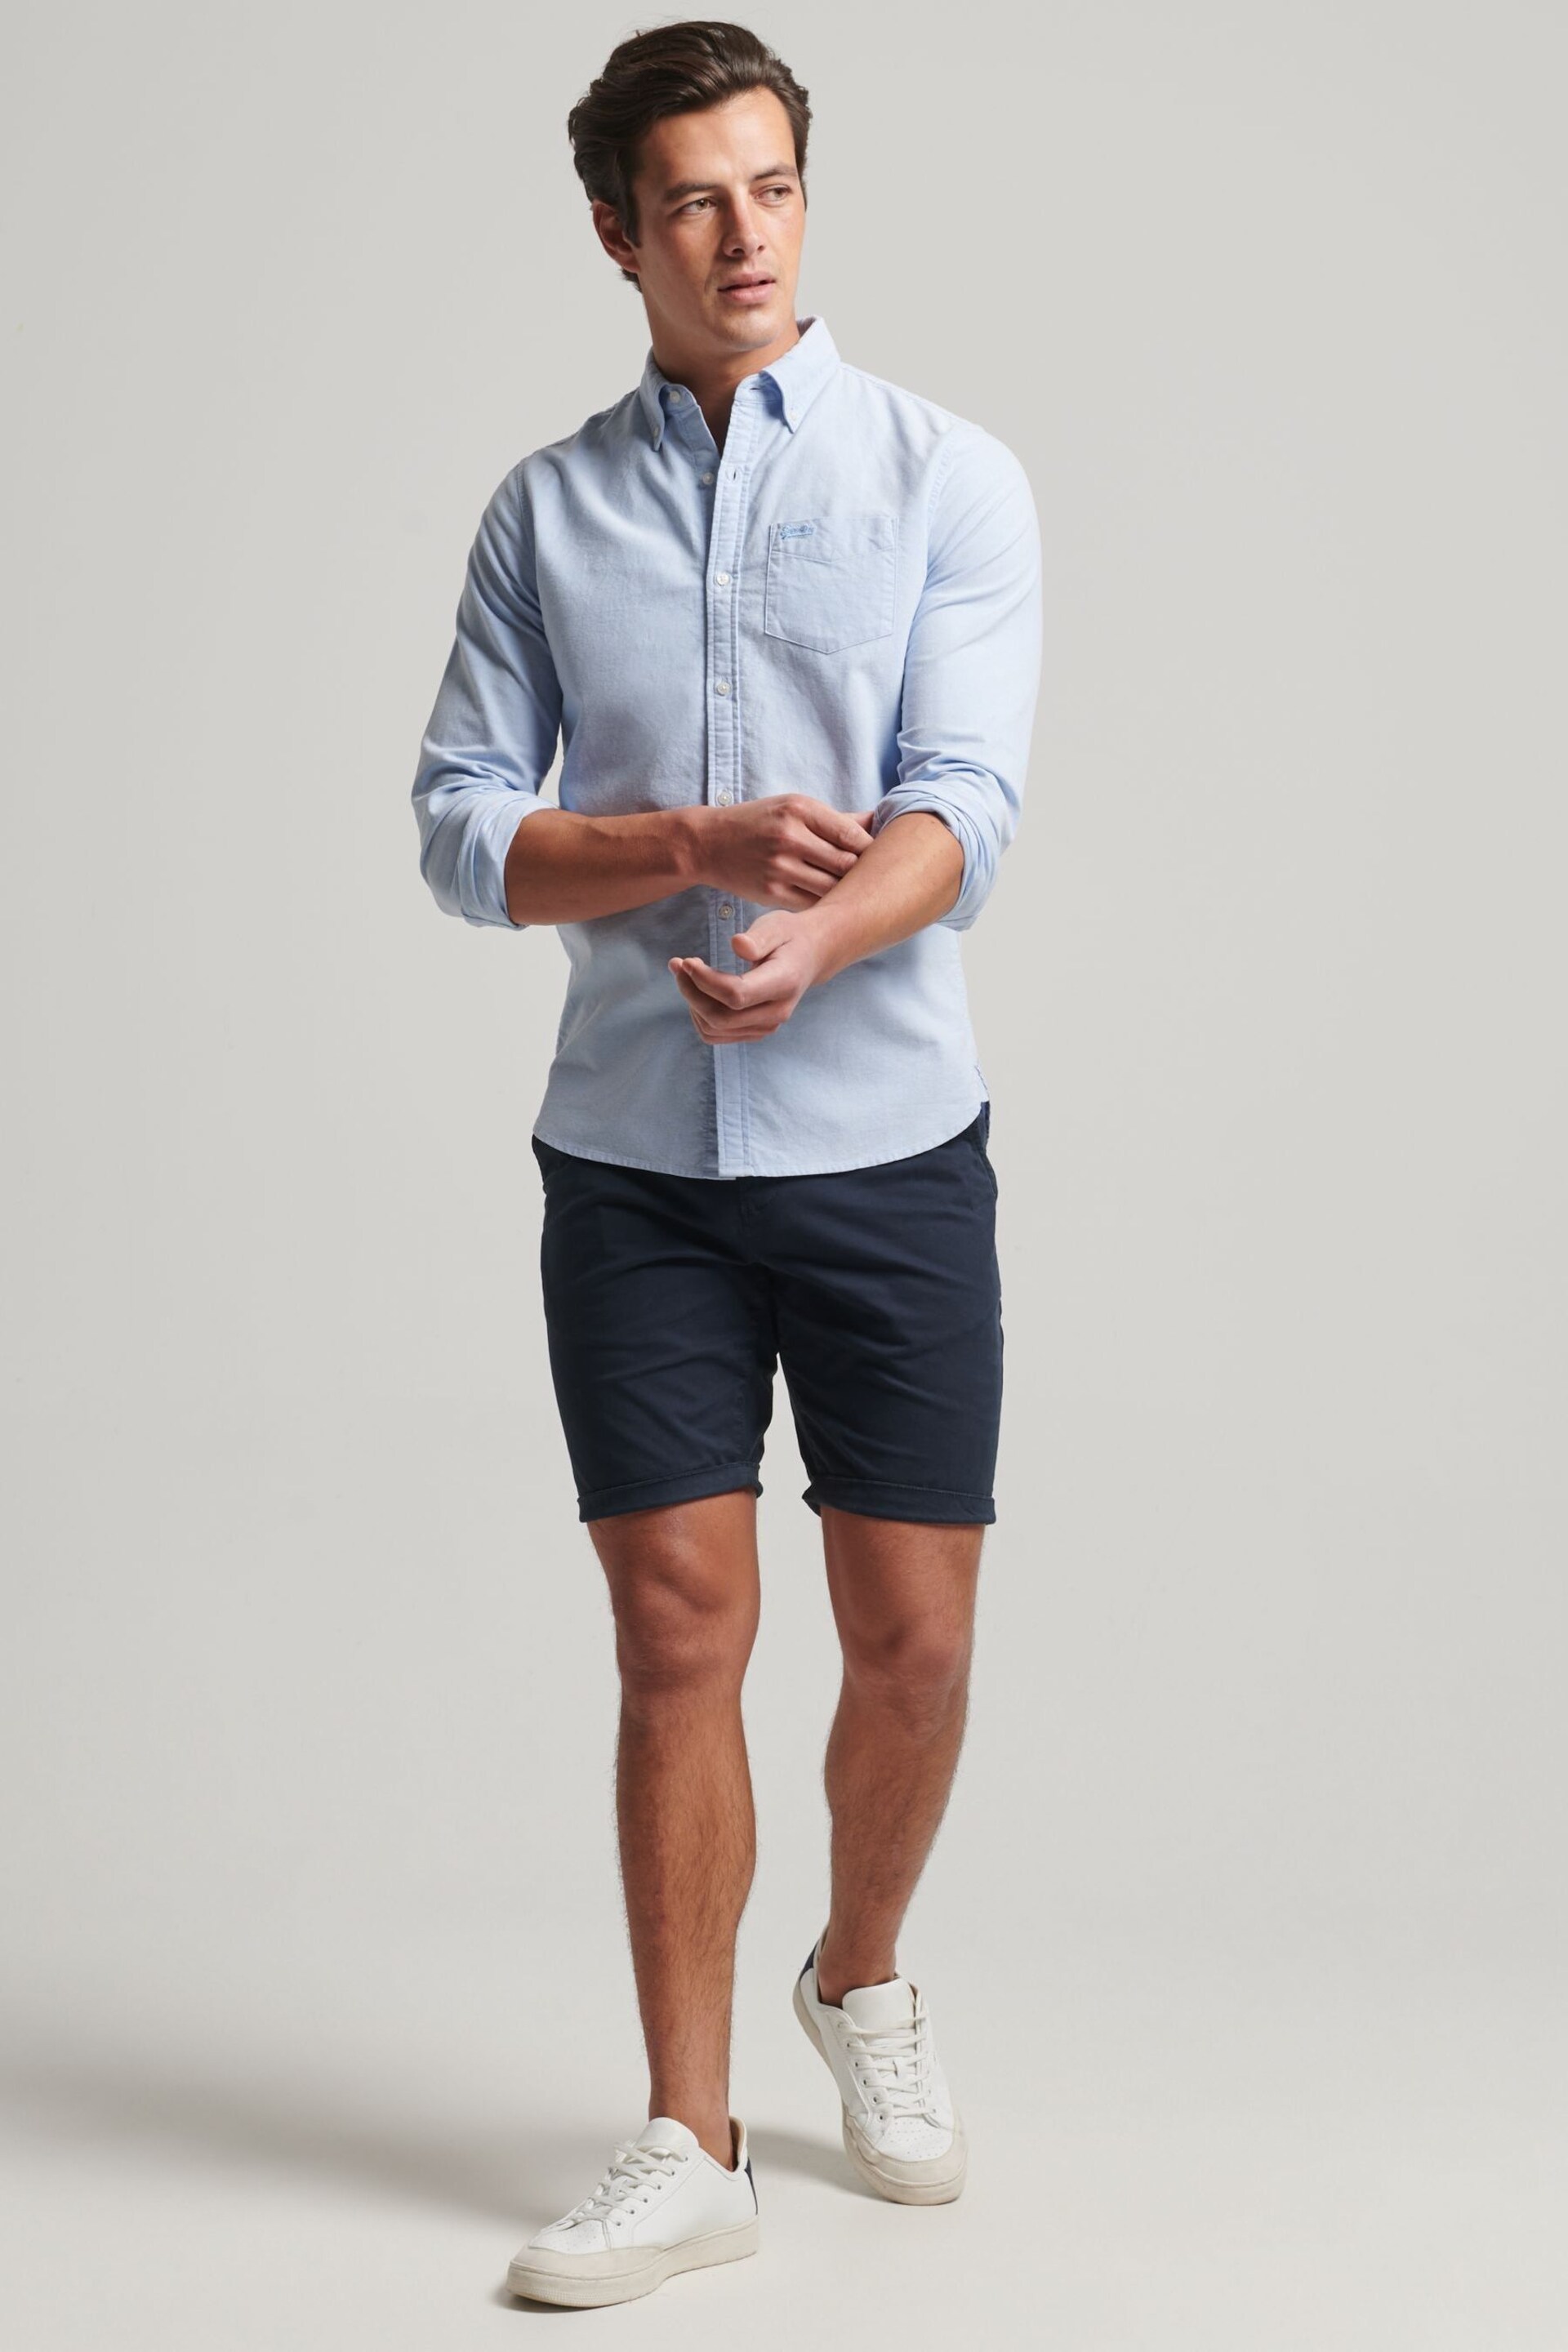 Superdry Classic Blue Oxford Cotton Long Sleeved Oxford Shirt - Image 2 of 7